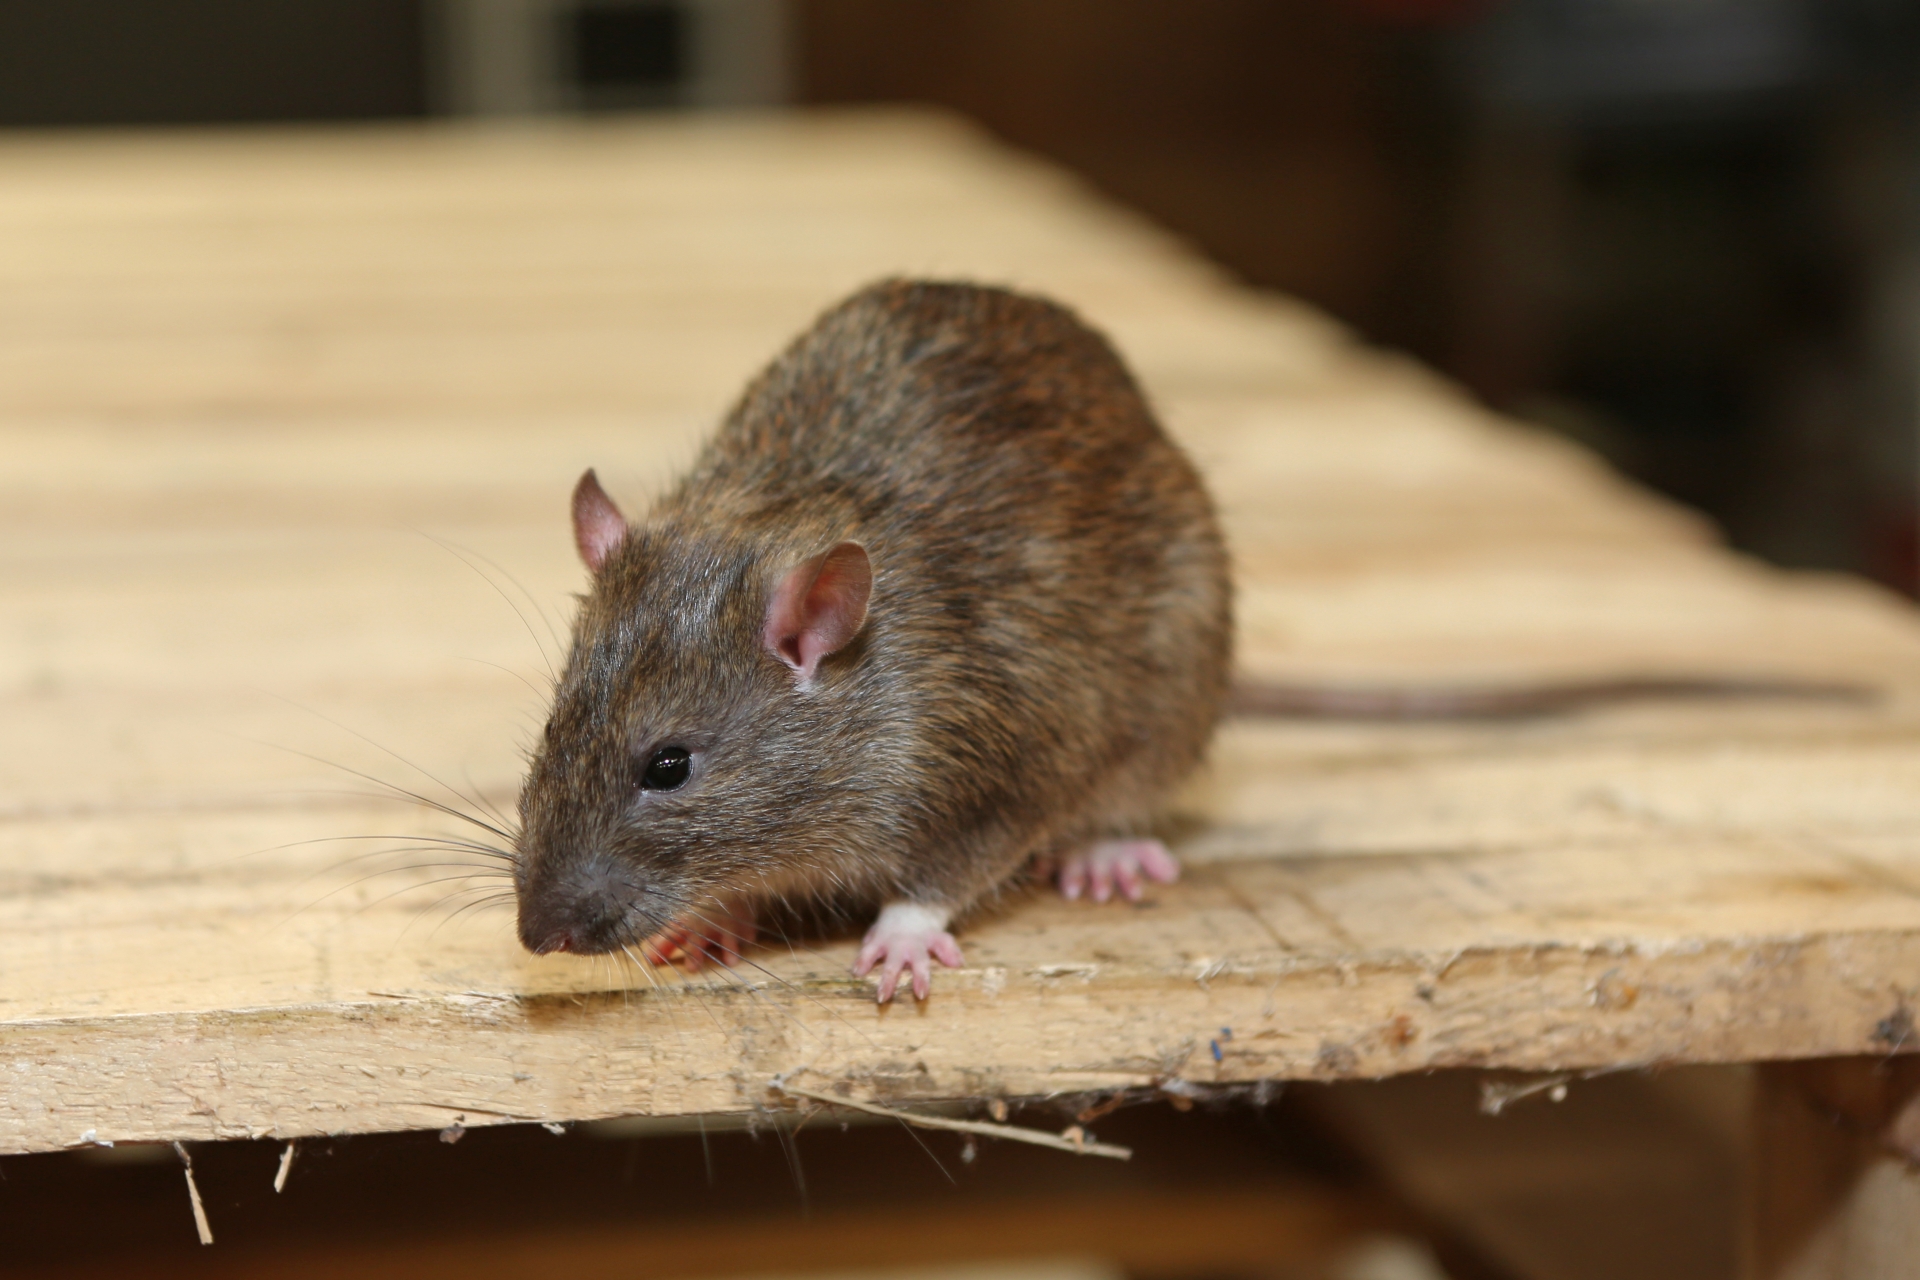 Rat Control, Pest Control in Borehamwood, Elstree, Well End, WD6. Call Now 020 8166 9746